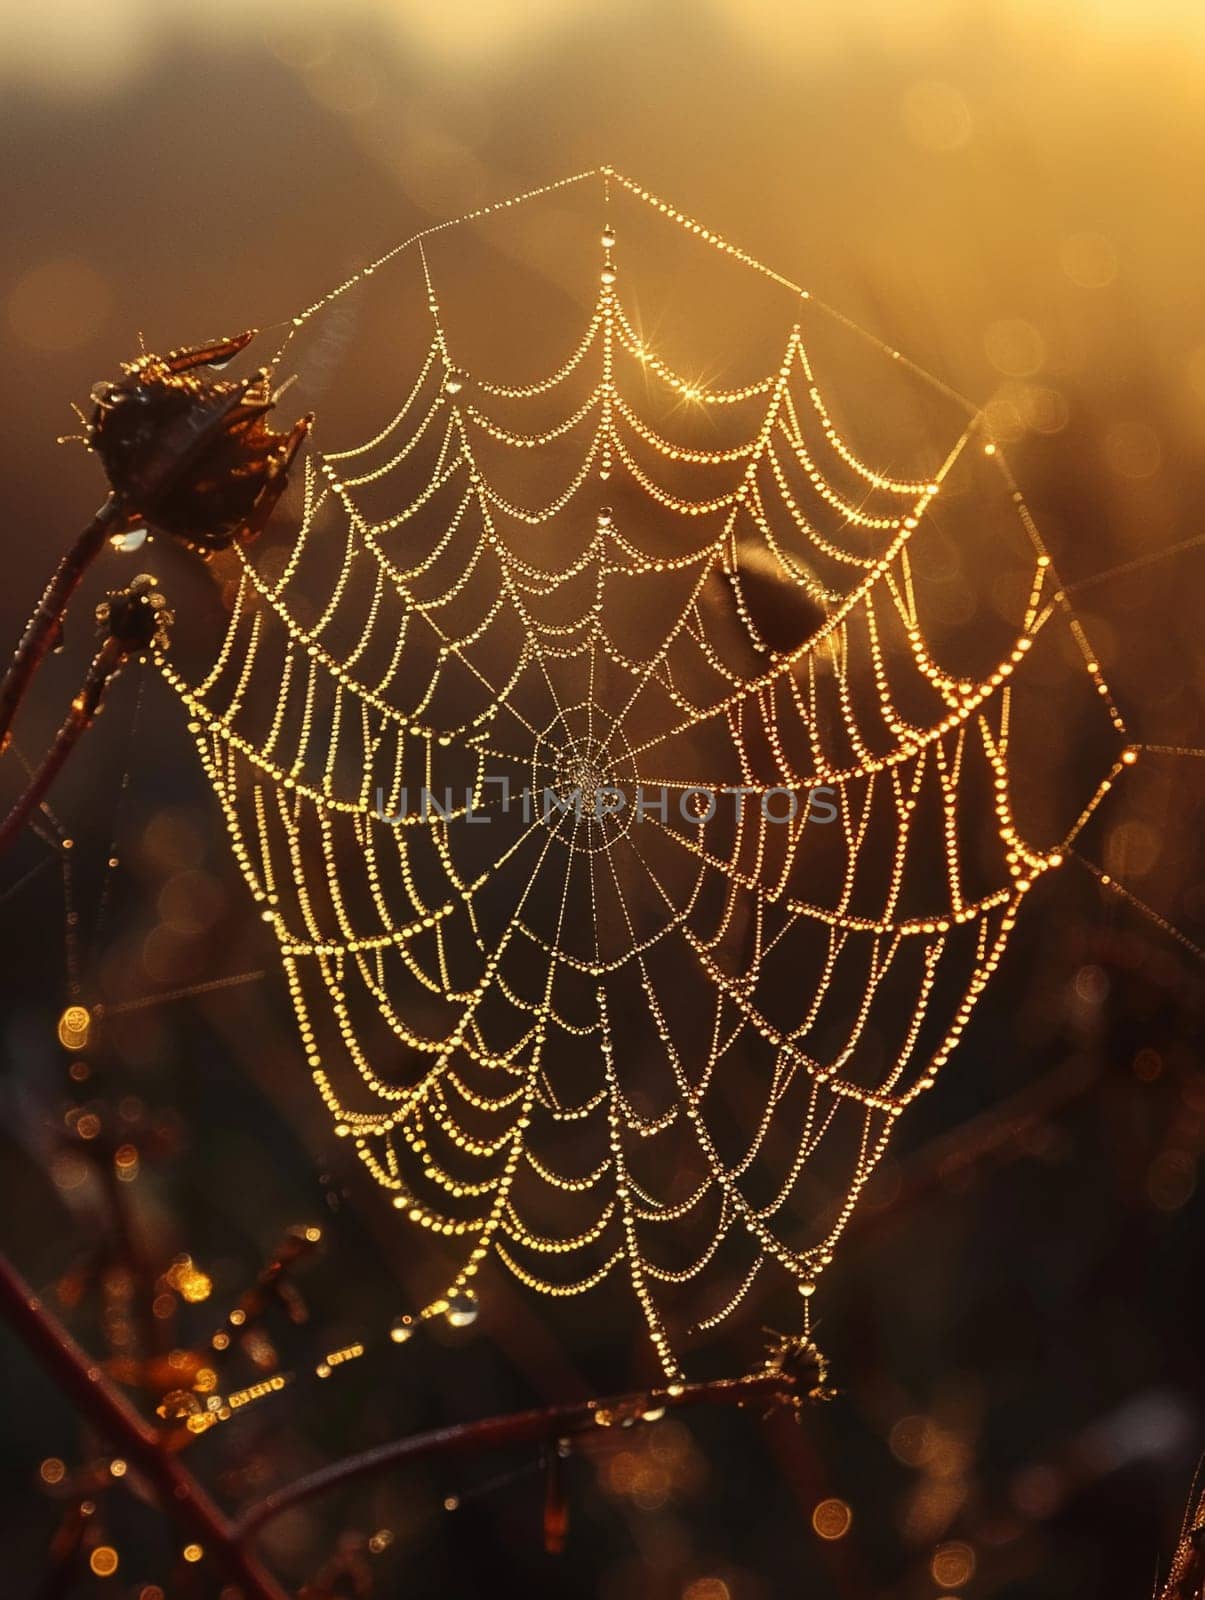 A dew-covered spider web in the early morning light by Benzoix